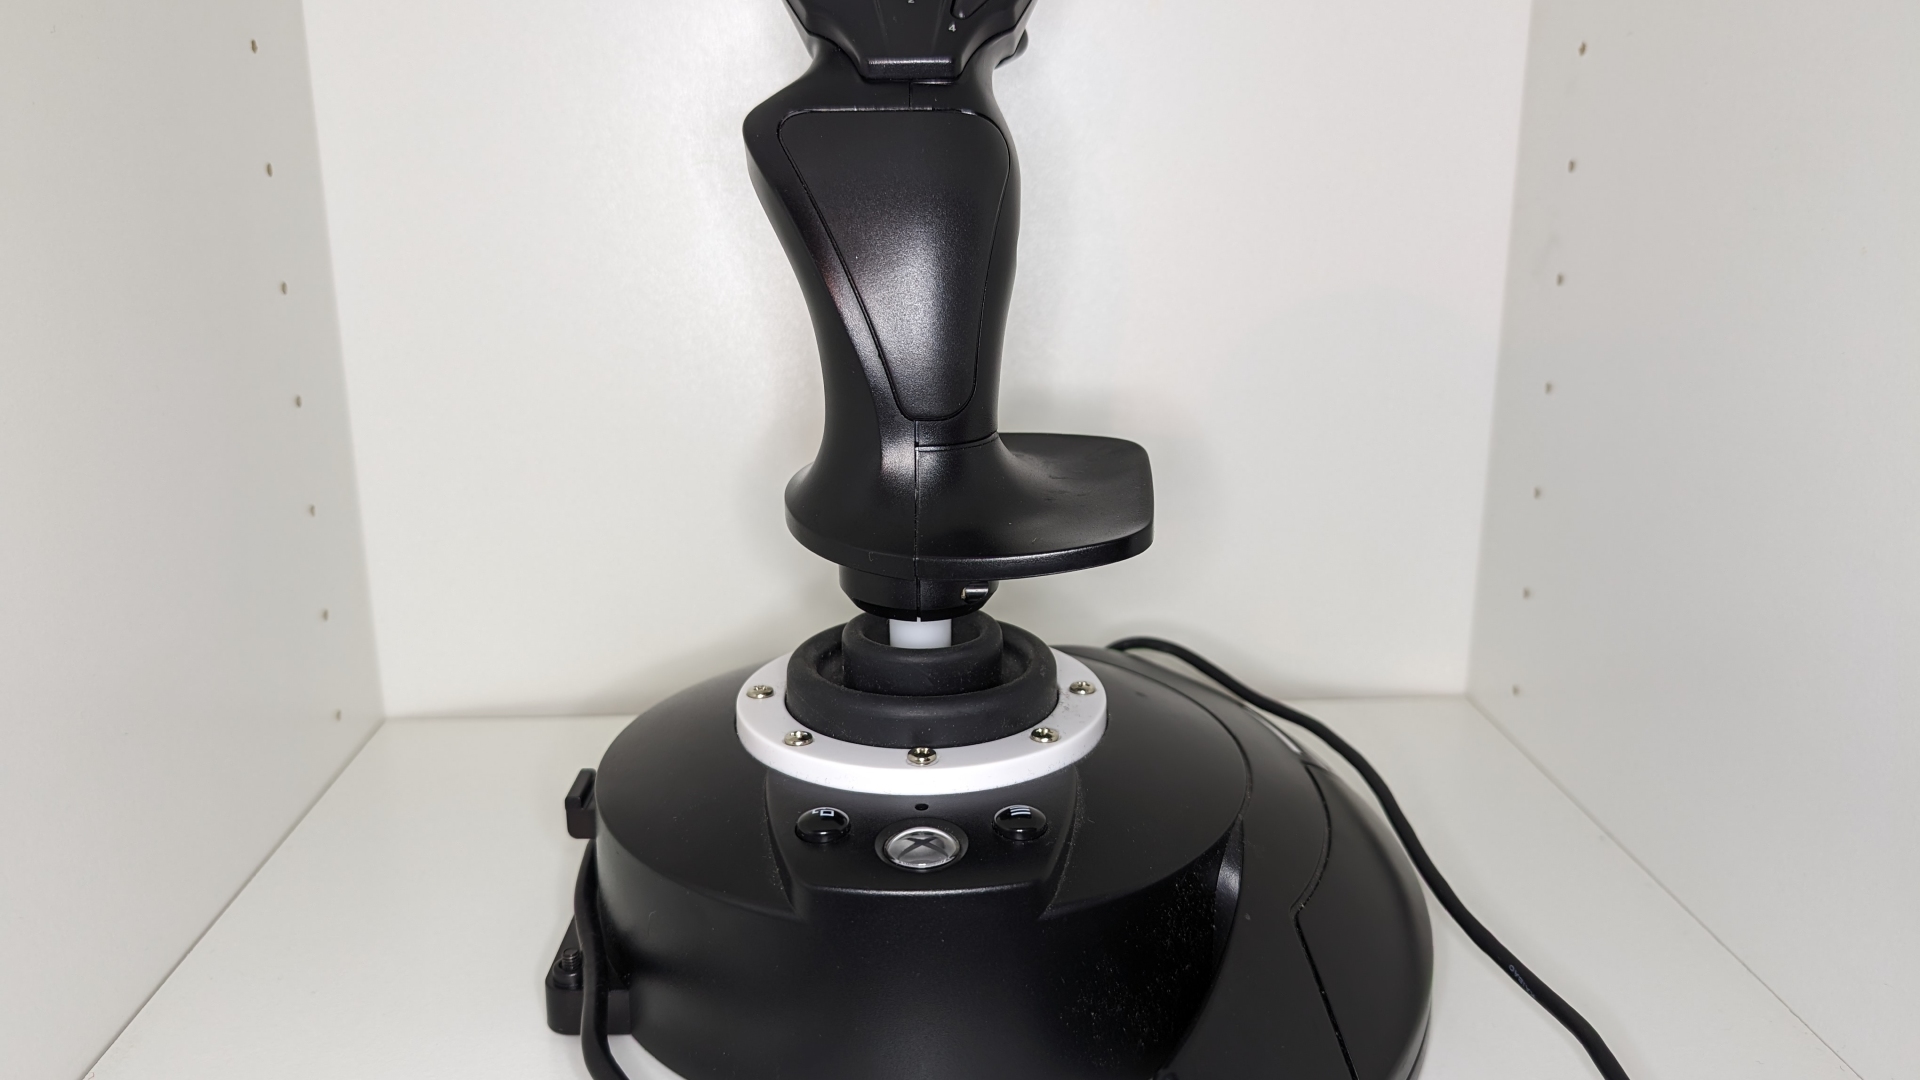 Thrustmaster Hotas flight stick review image showing the joystick alone.